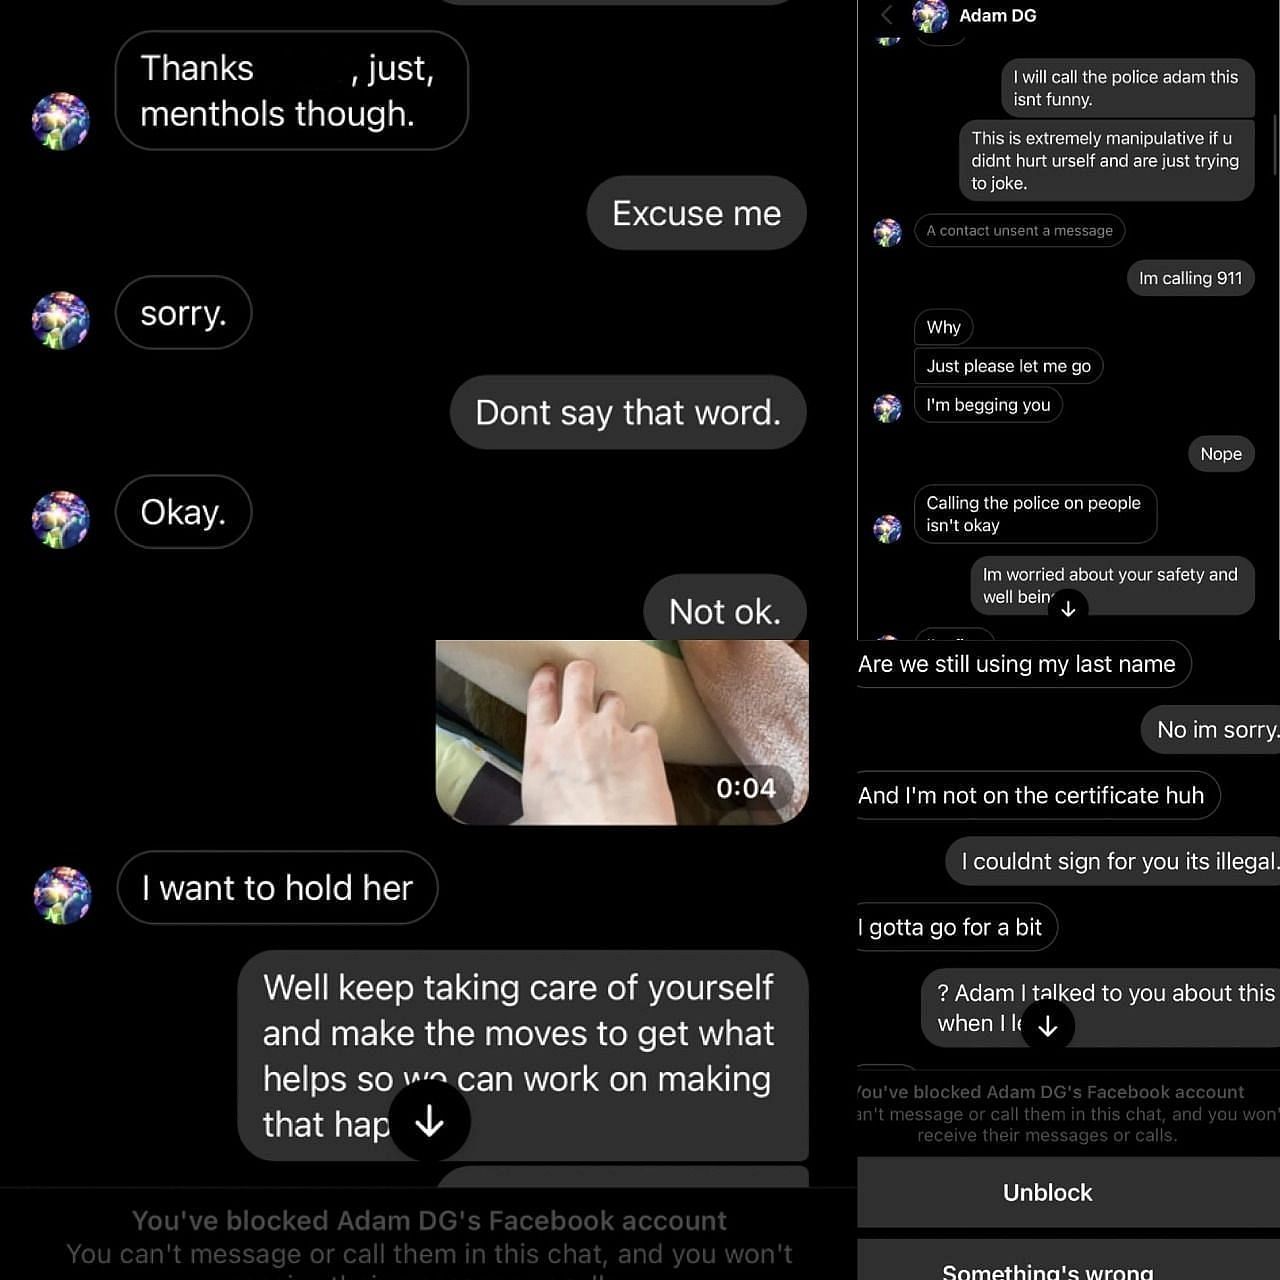 SkyDoesMinecraft&#039;s private conversation where he casually uses n-word (Images via Elizabeth/Twitter)